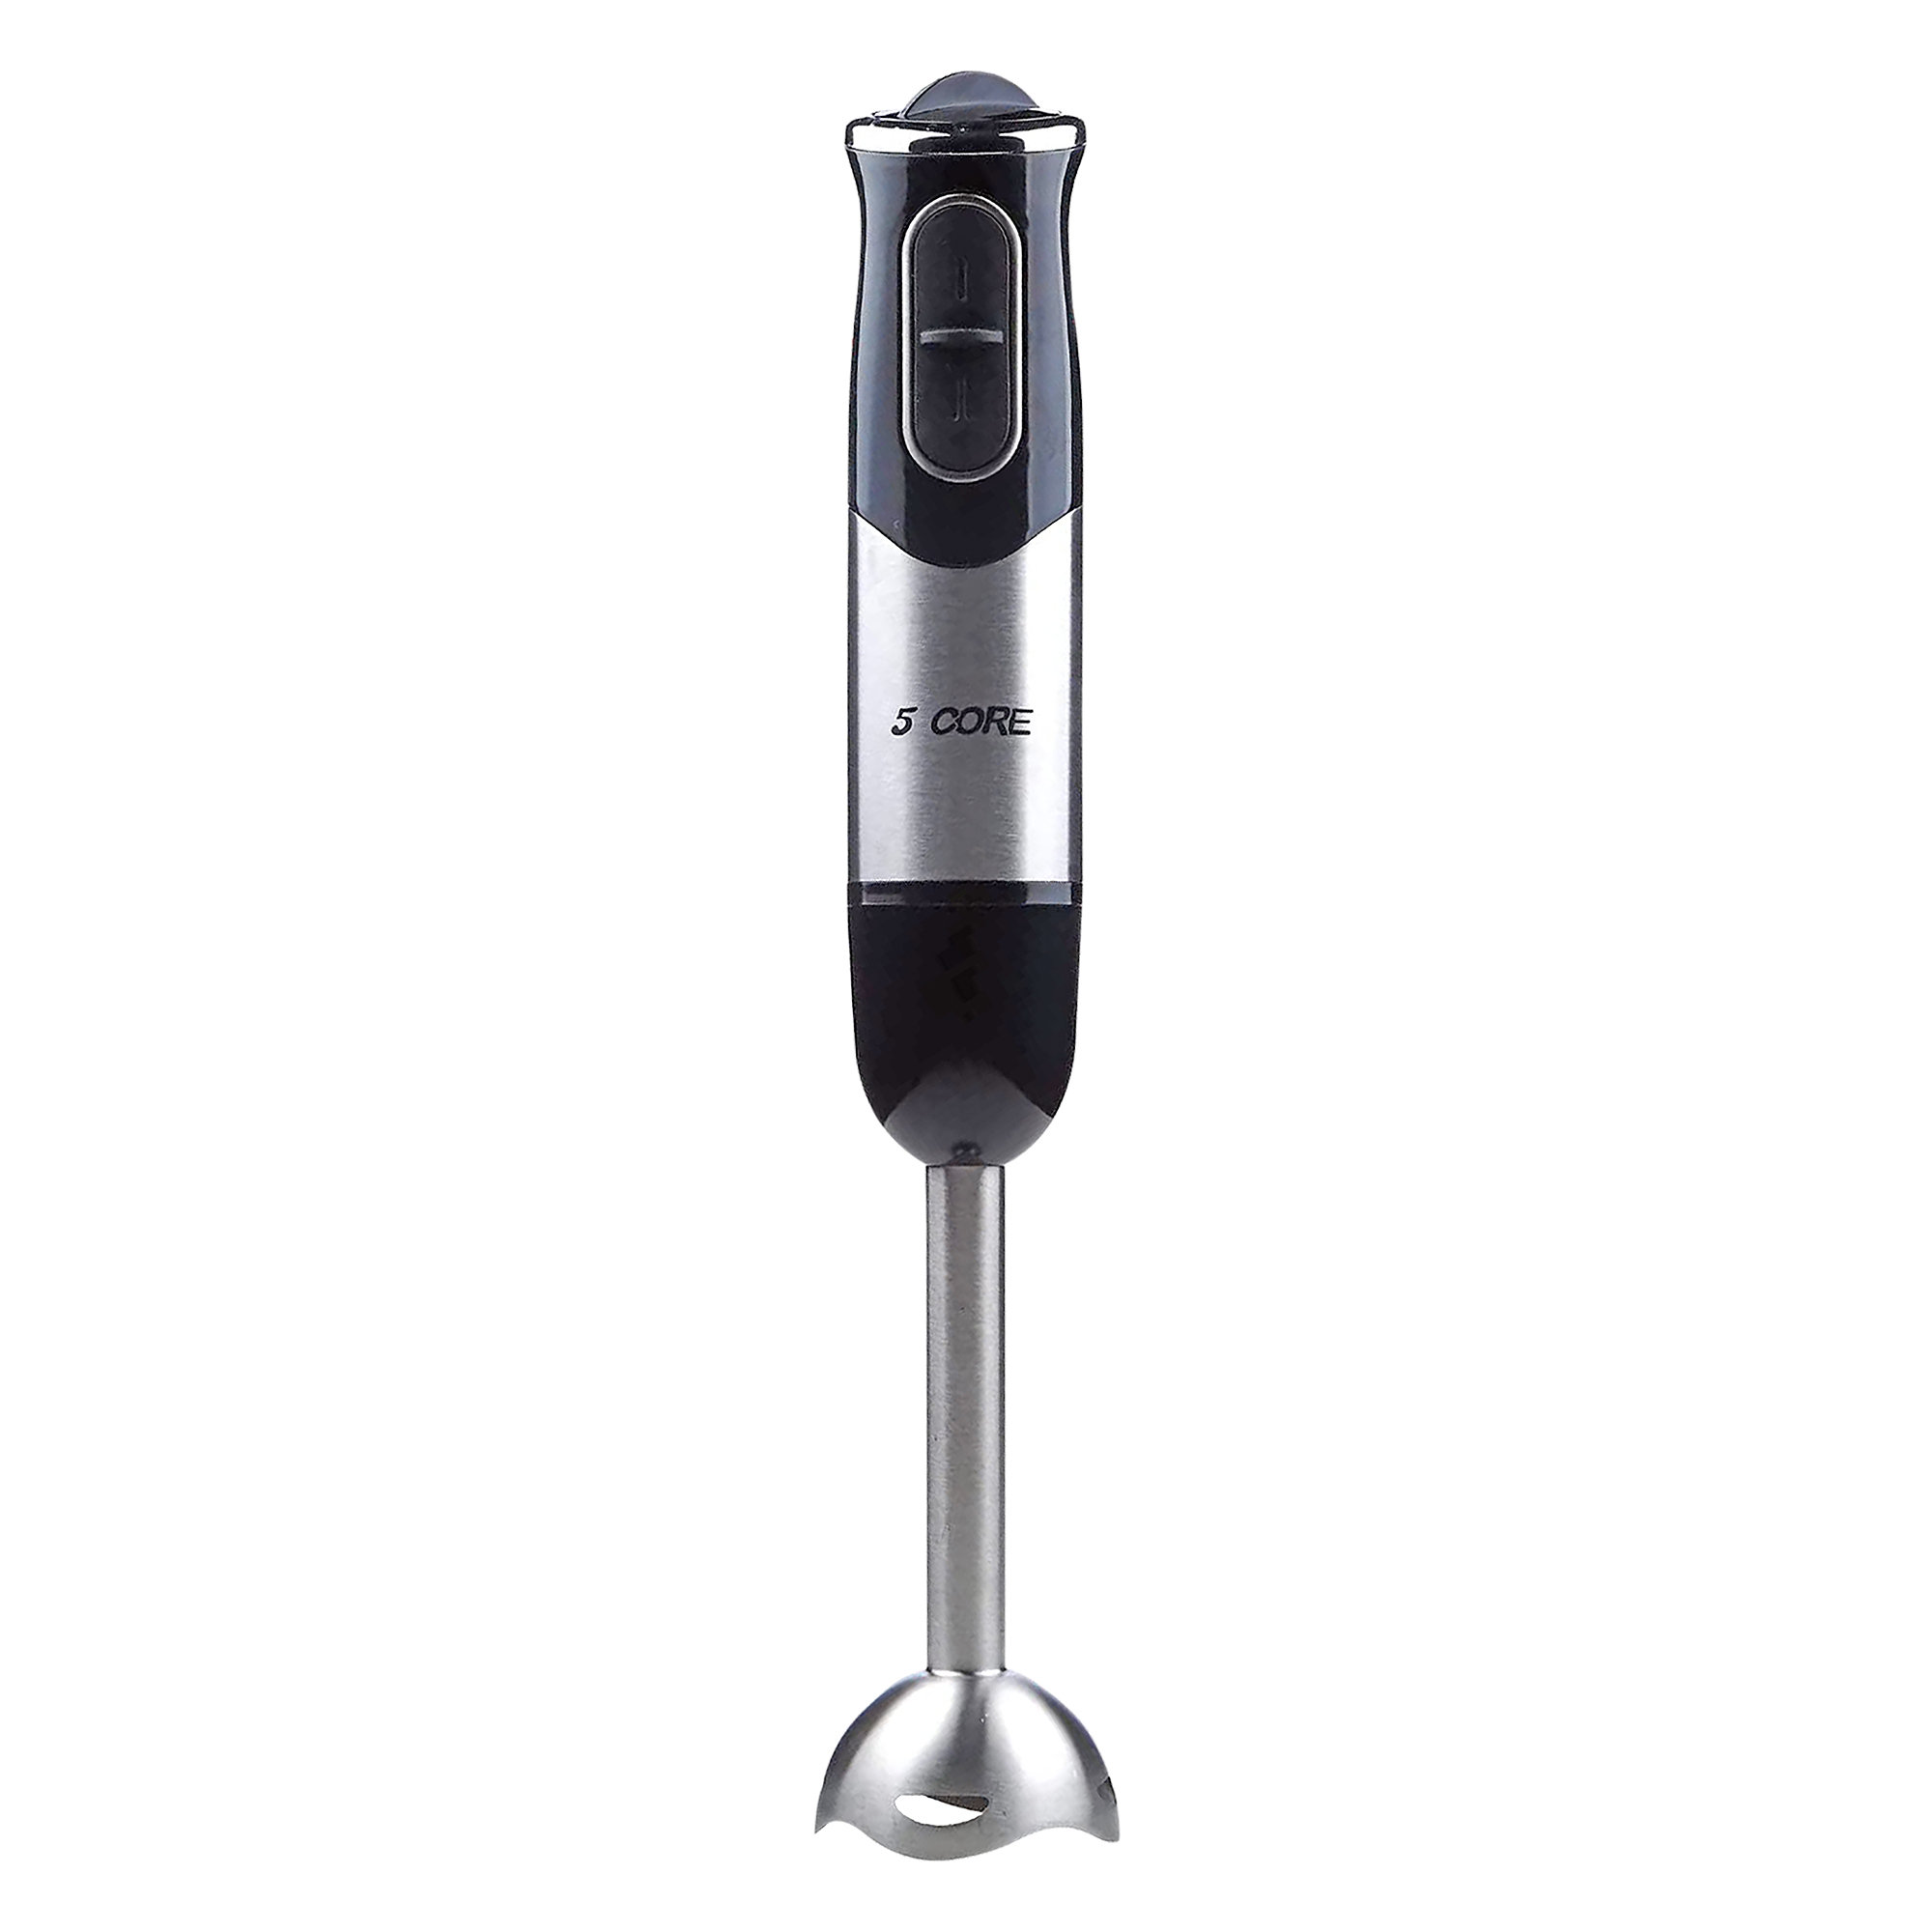 5 Core 500W Hand with Blender | Wayfair Stainless Steel High-Performance Motor 1510 HB Blades